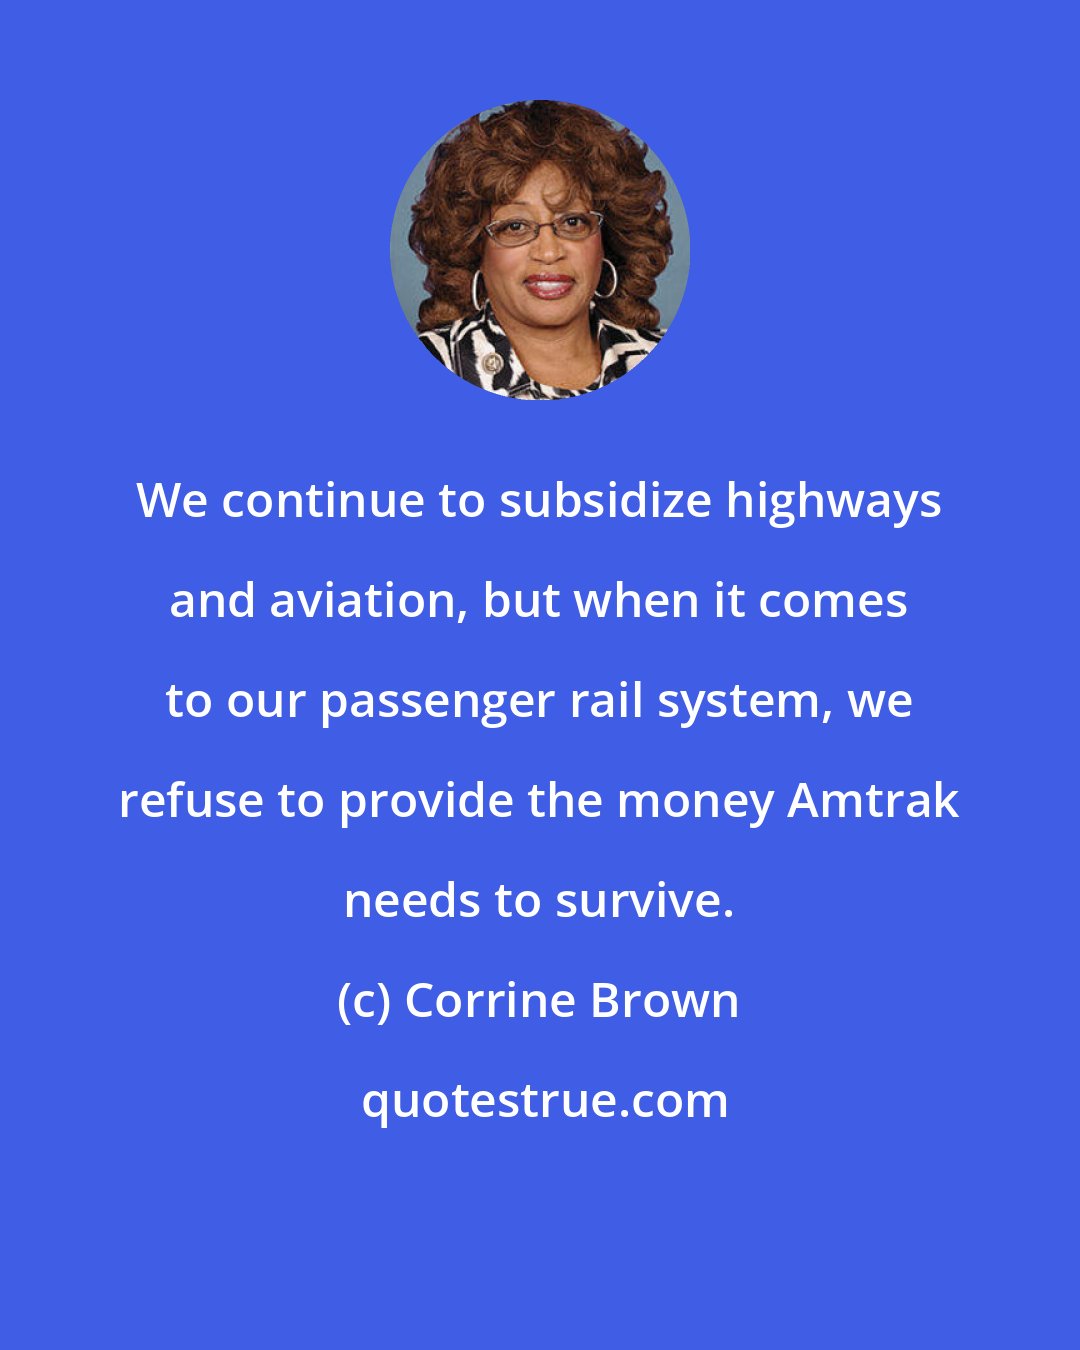 Corrine Brown: We continue to subsidize highways and aviation, but when it comes to our passenger rail system, we refuse to provide the money Amtrak needs to survive.